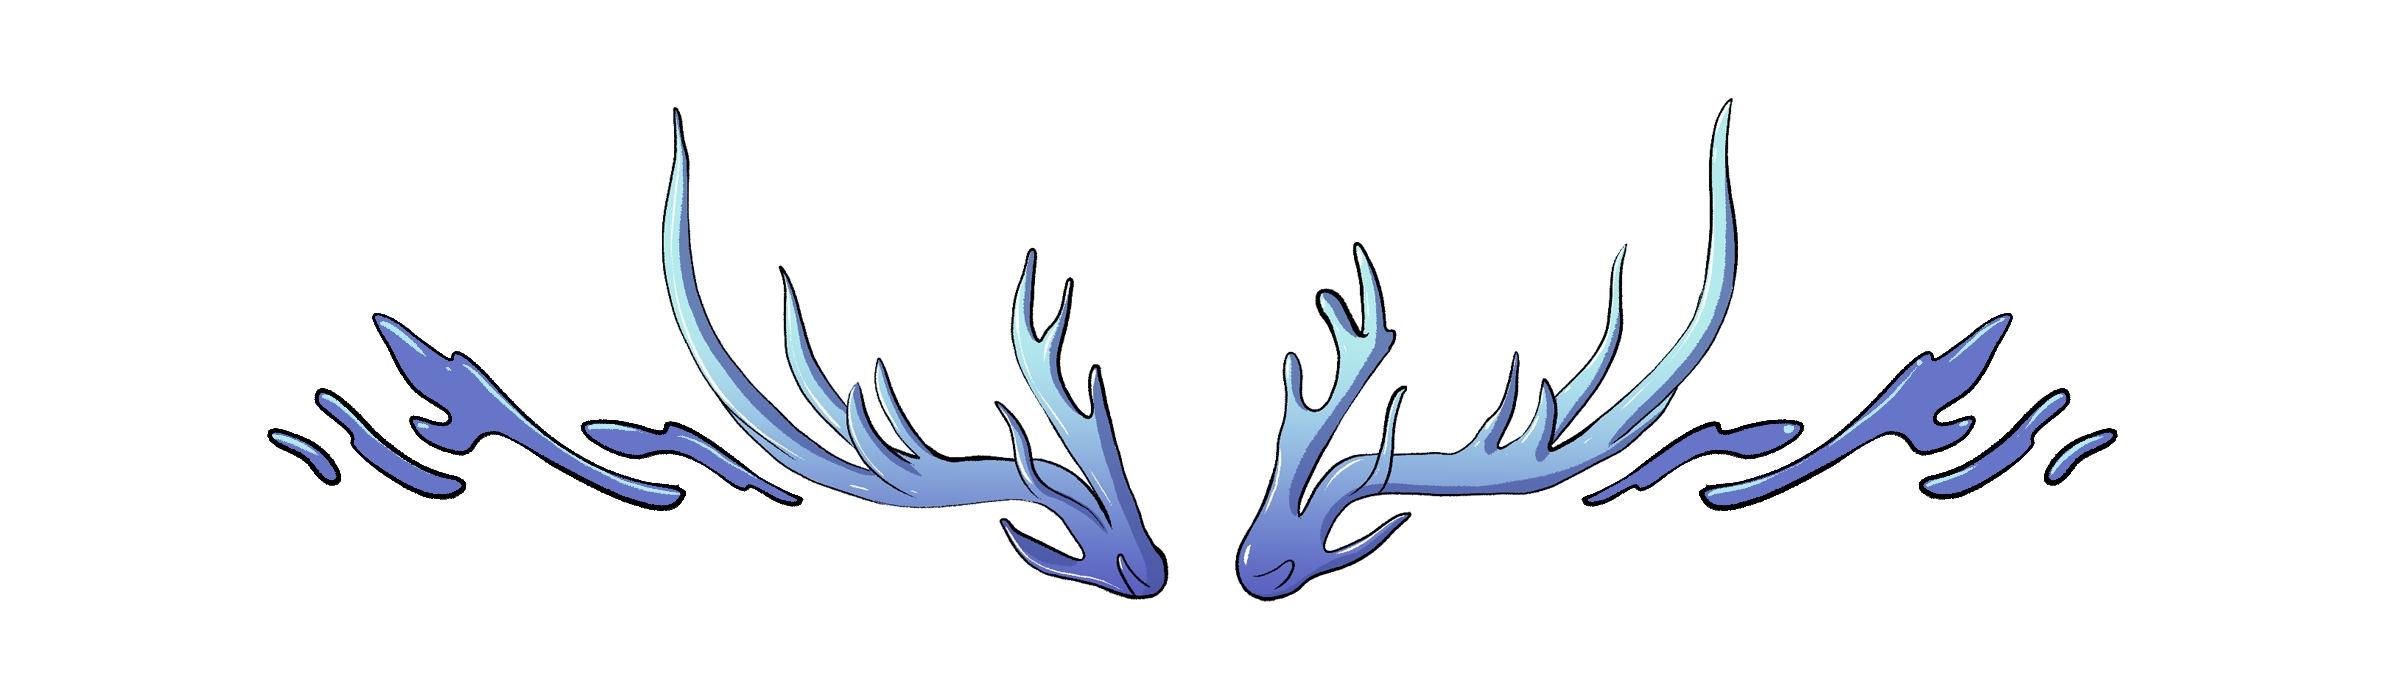 Illustration of blue antlers used to divide story text